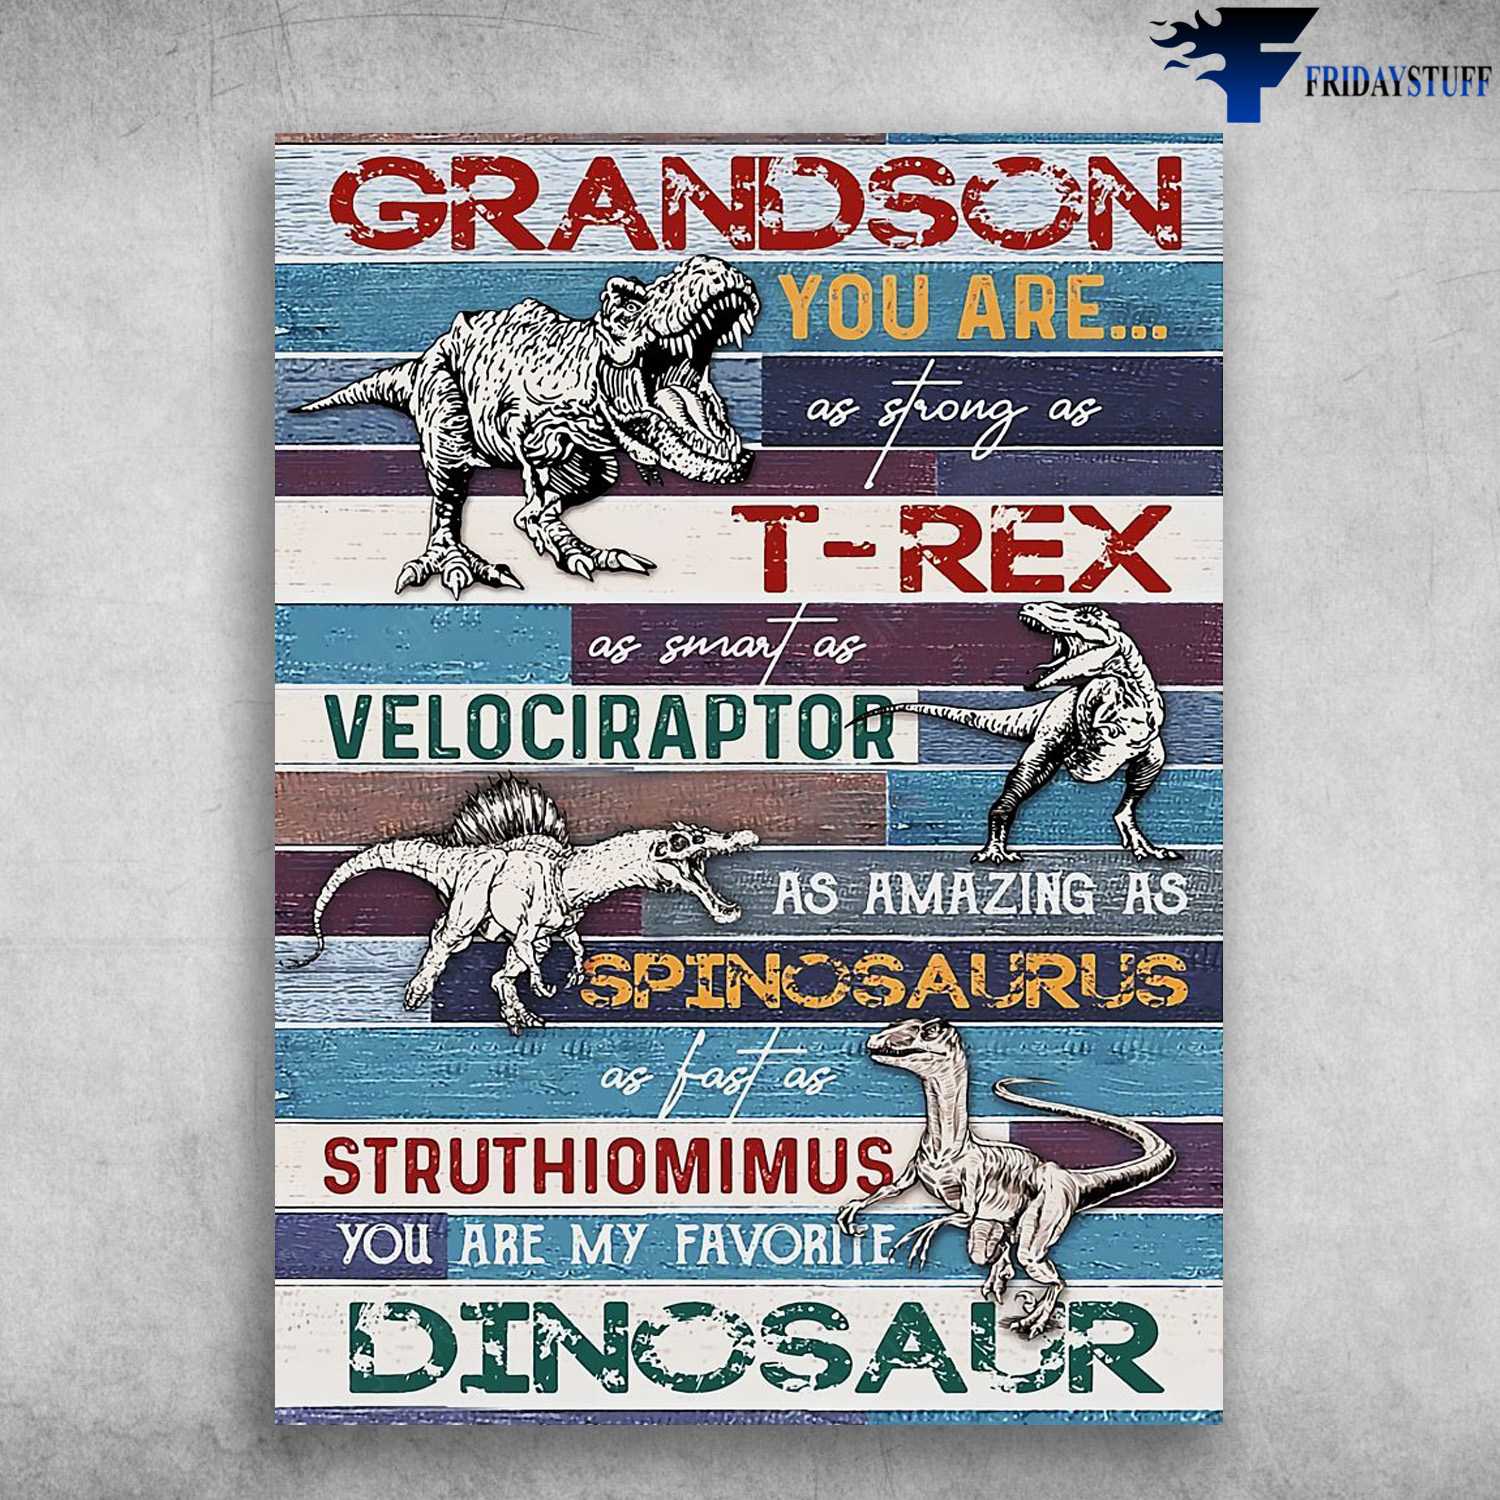 Dinosaur Poster, Grandson You Are As Strong As T-Rex, As Smart As Velociraptor, As Amazing As Spinosaurus